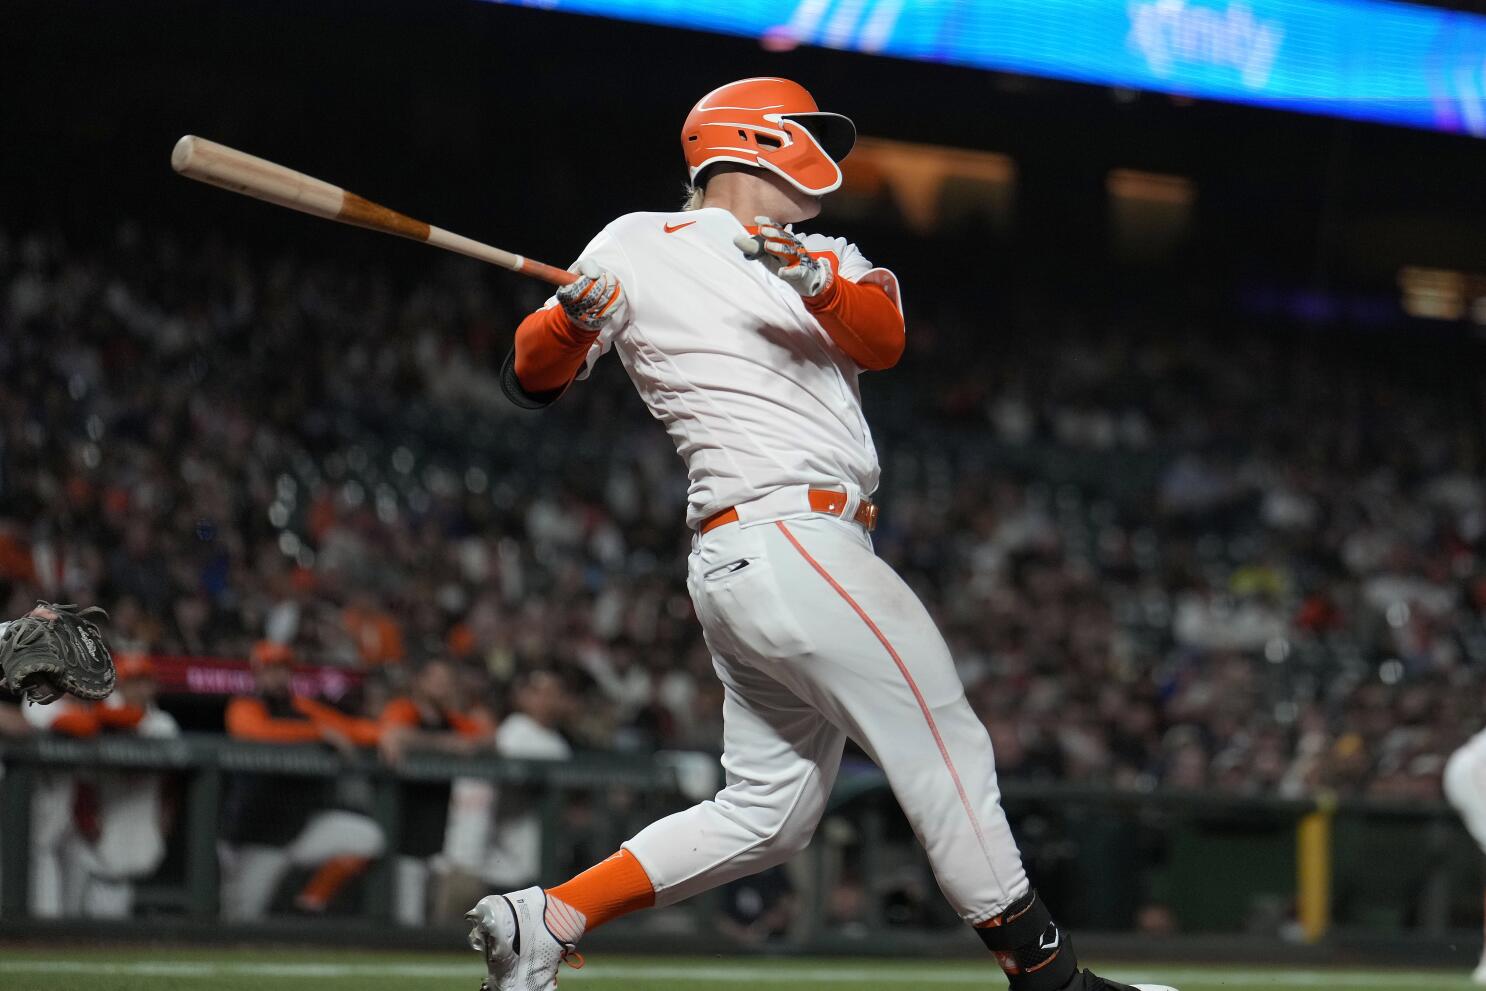 Pederson hits 3 HRs, drives in 8 as Giants stun Mets 13-12